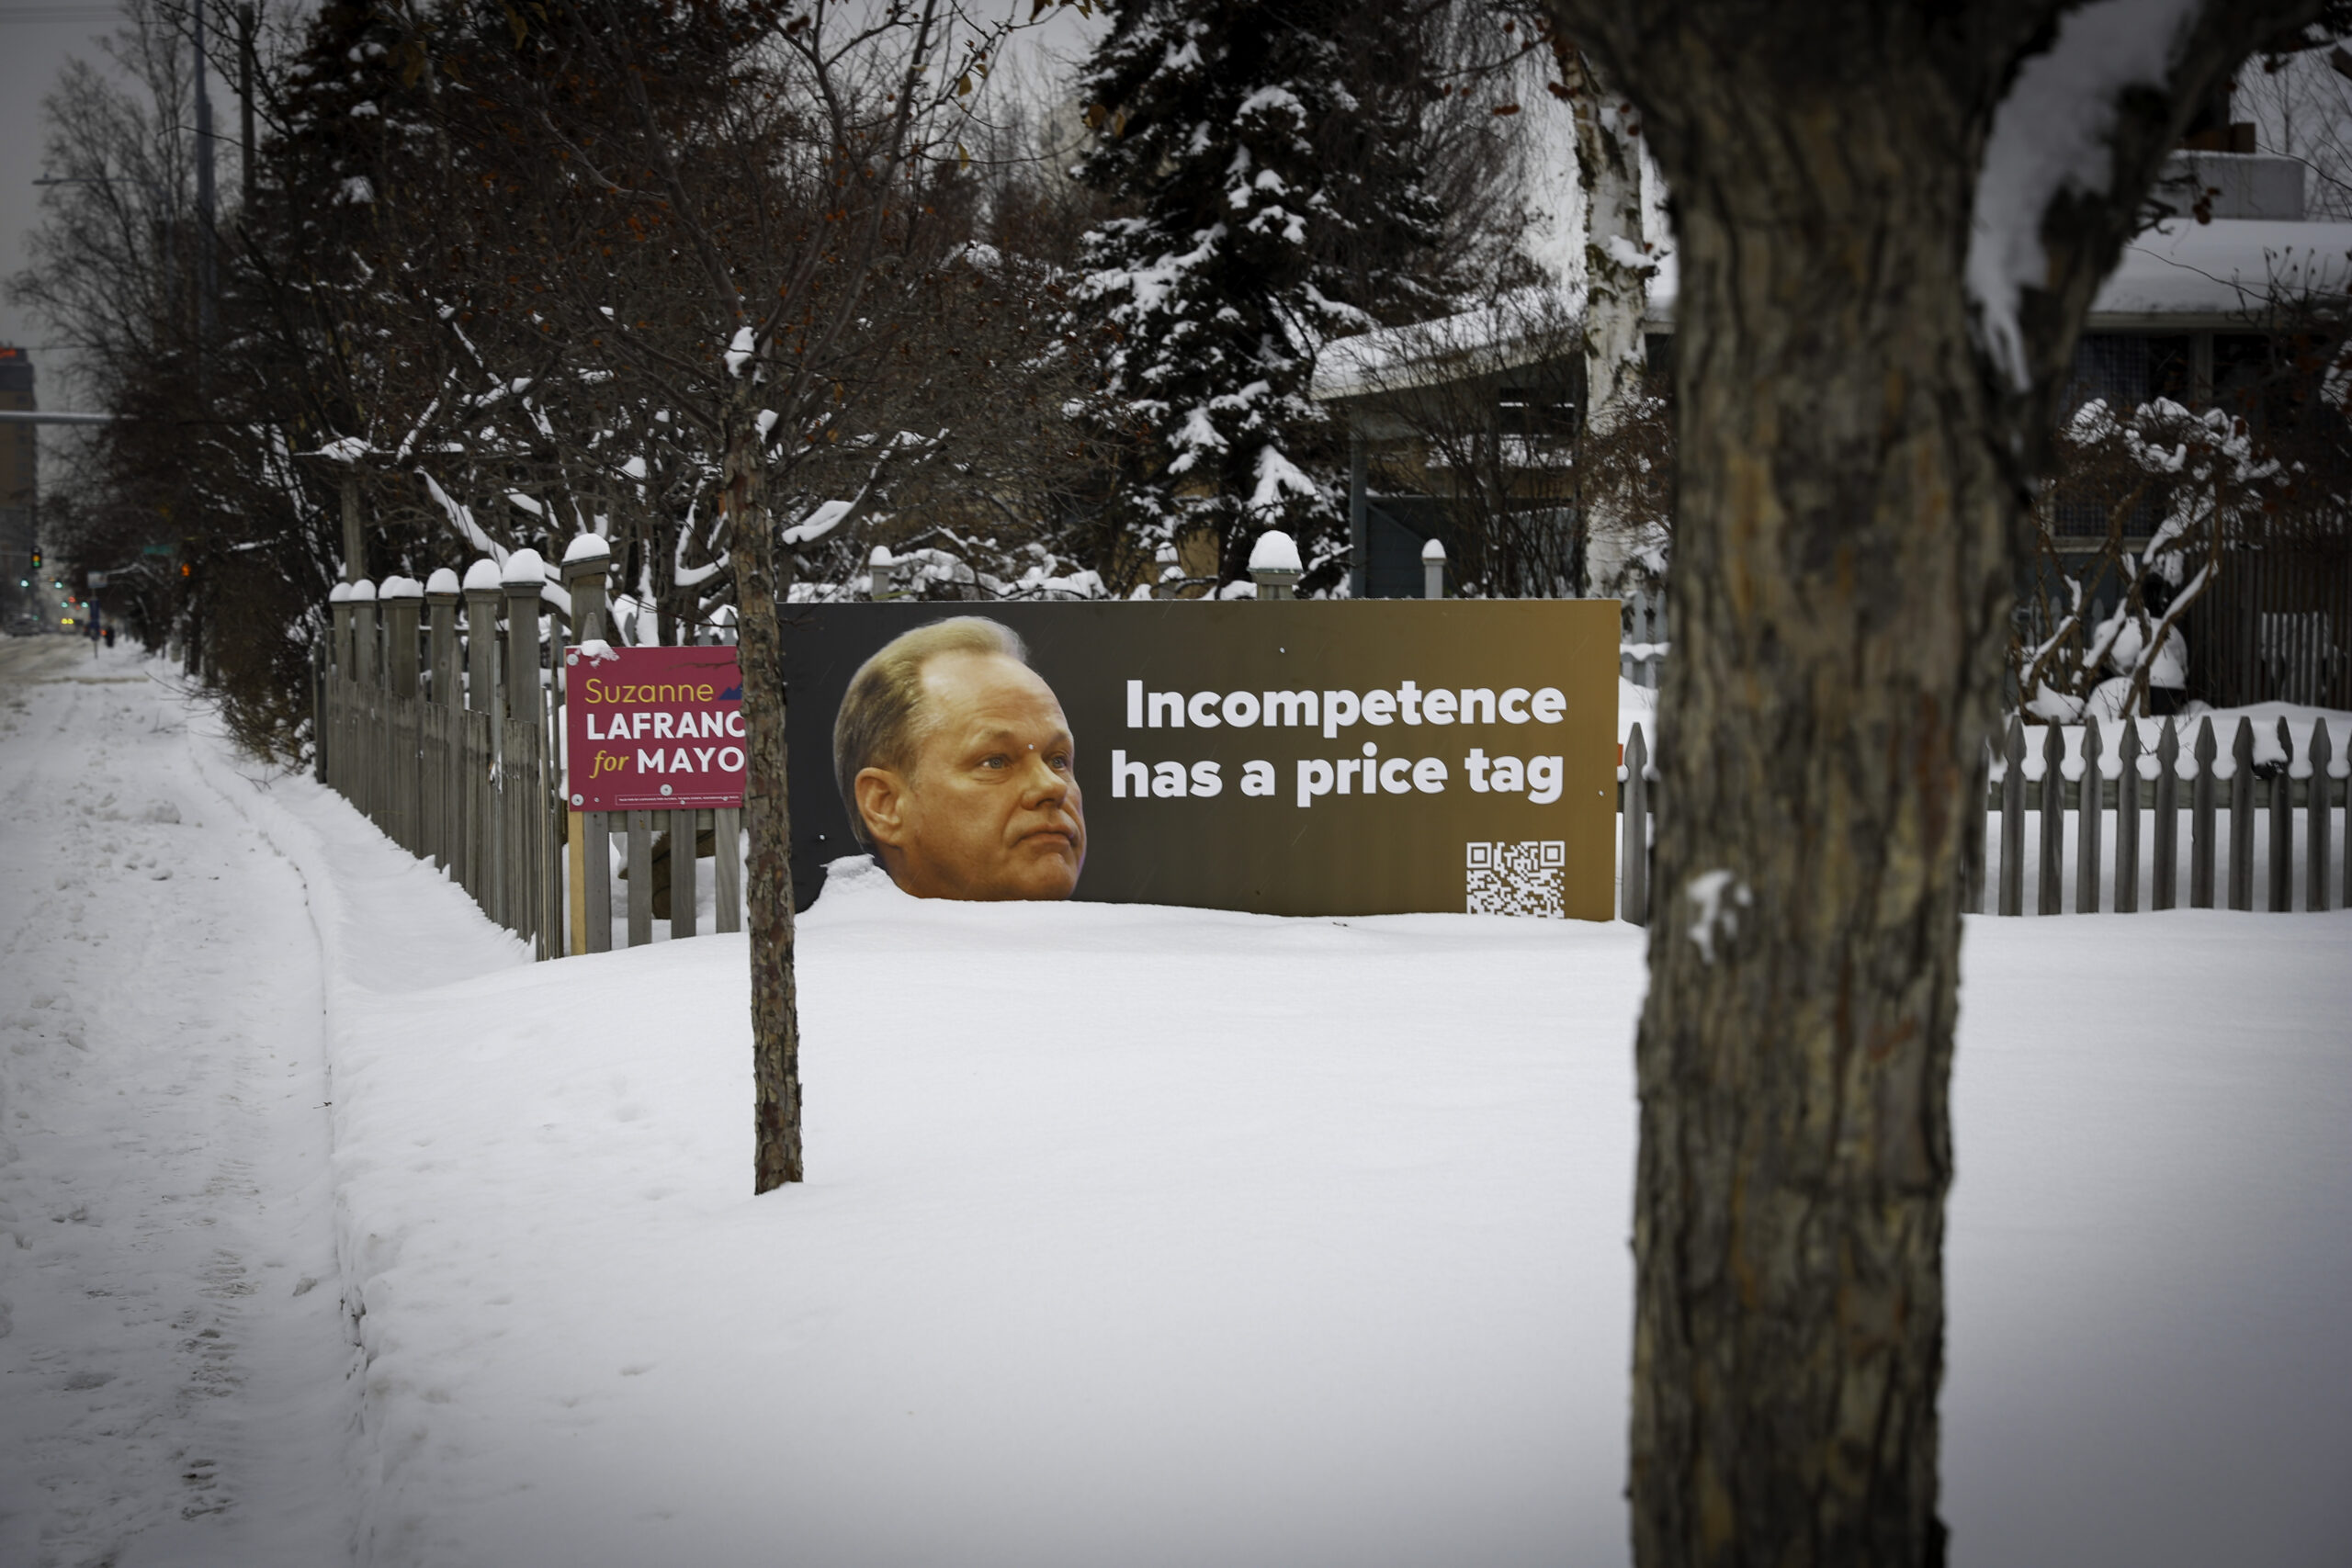 A sign that says, "Incompetence has a price tag" stand halfway buried in snow along a picket fence.